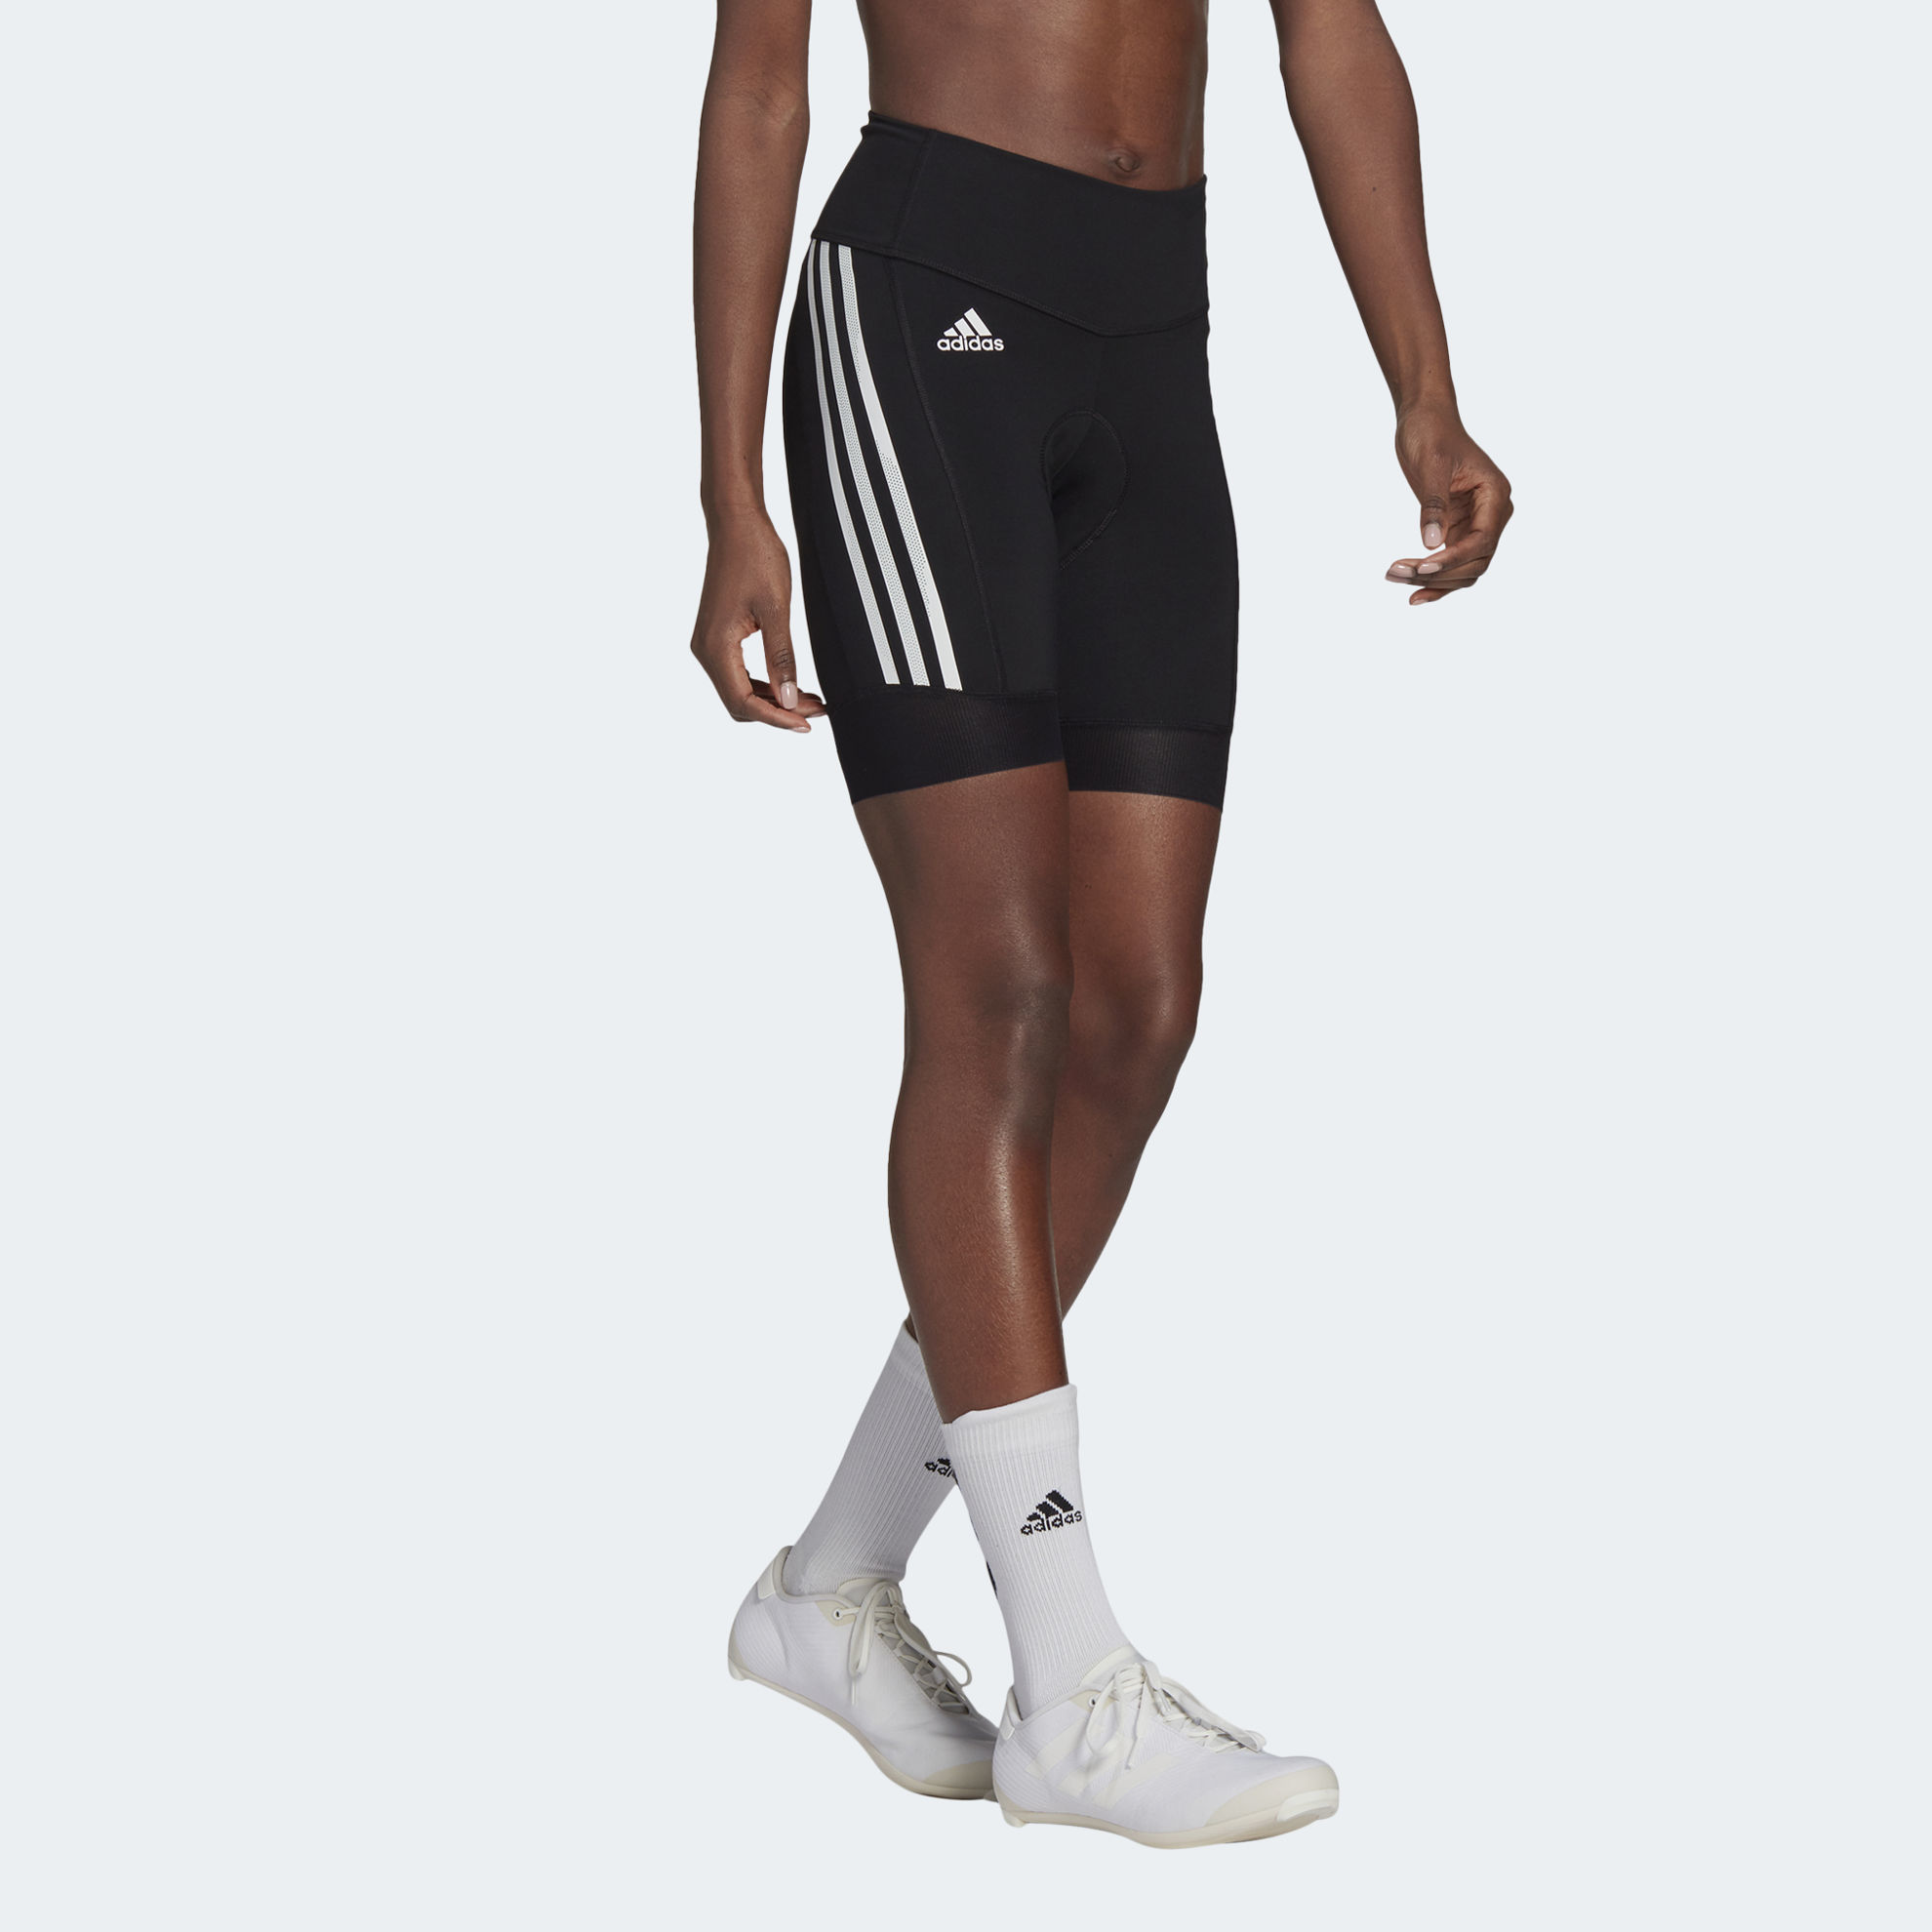 Adidas The Padded Cycling Shorts (Plus Size) Black Women's, 50% OFF